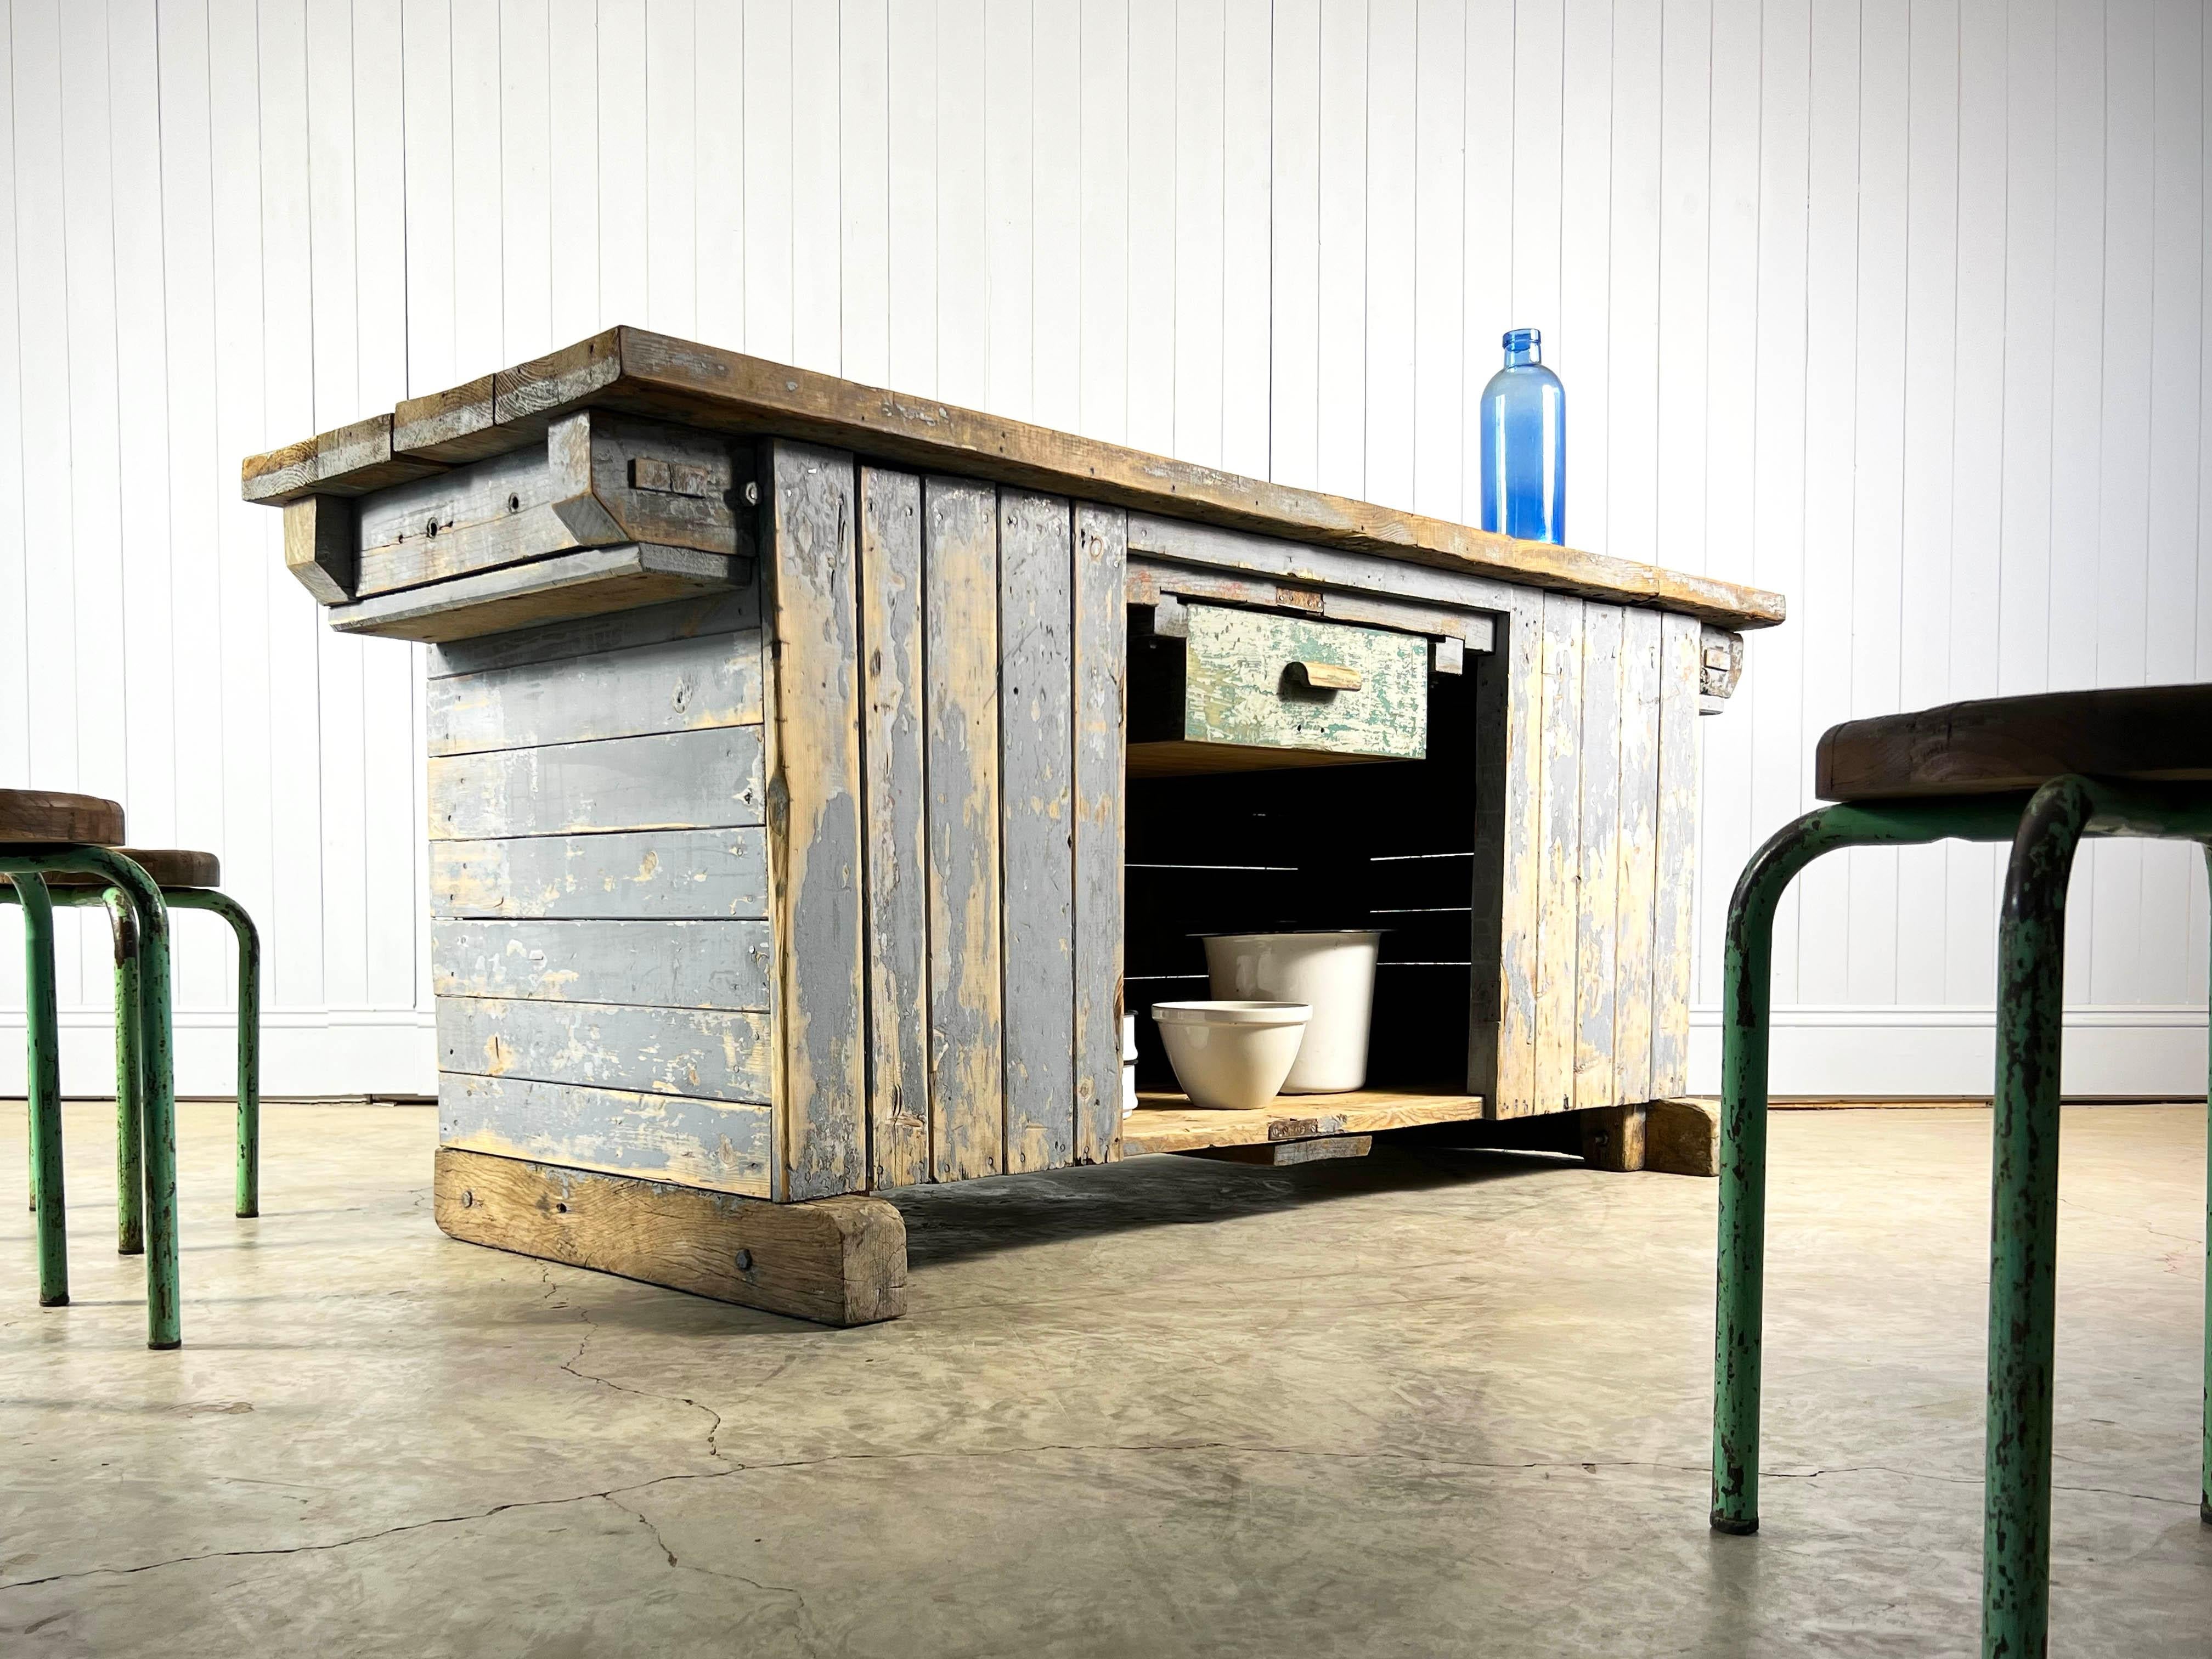 We love the colour of this 1930's factory workbench which was sourced in the Czech Republic.

This has been given a good scrub inside and out so it is cleaned but still retains its original colour and patina.  Structurally good and sturdy.

The top